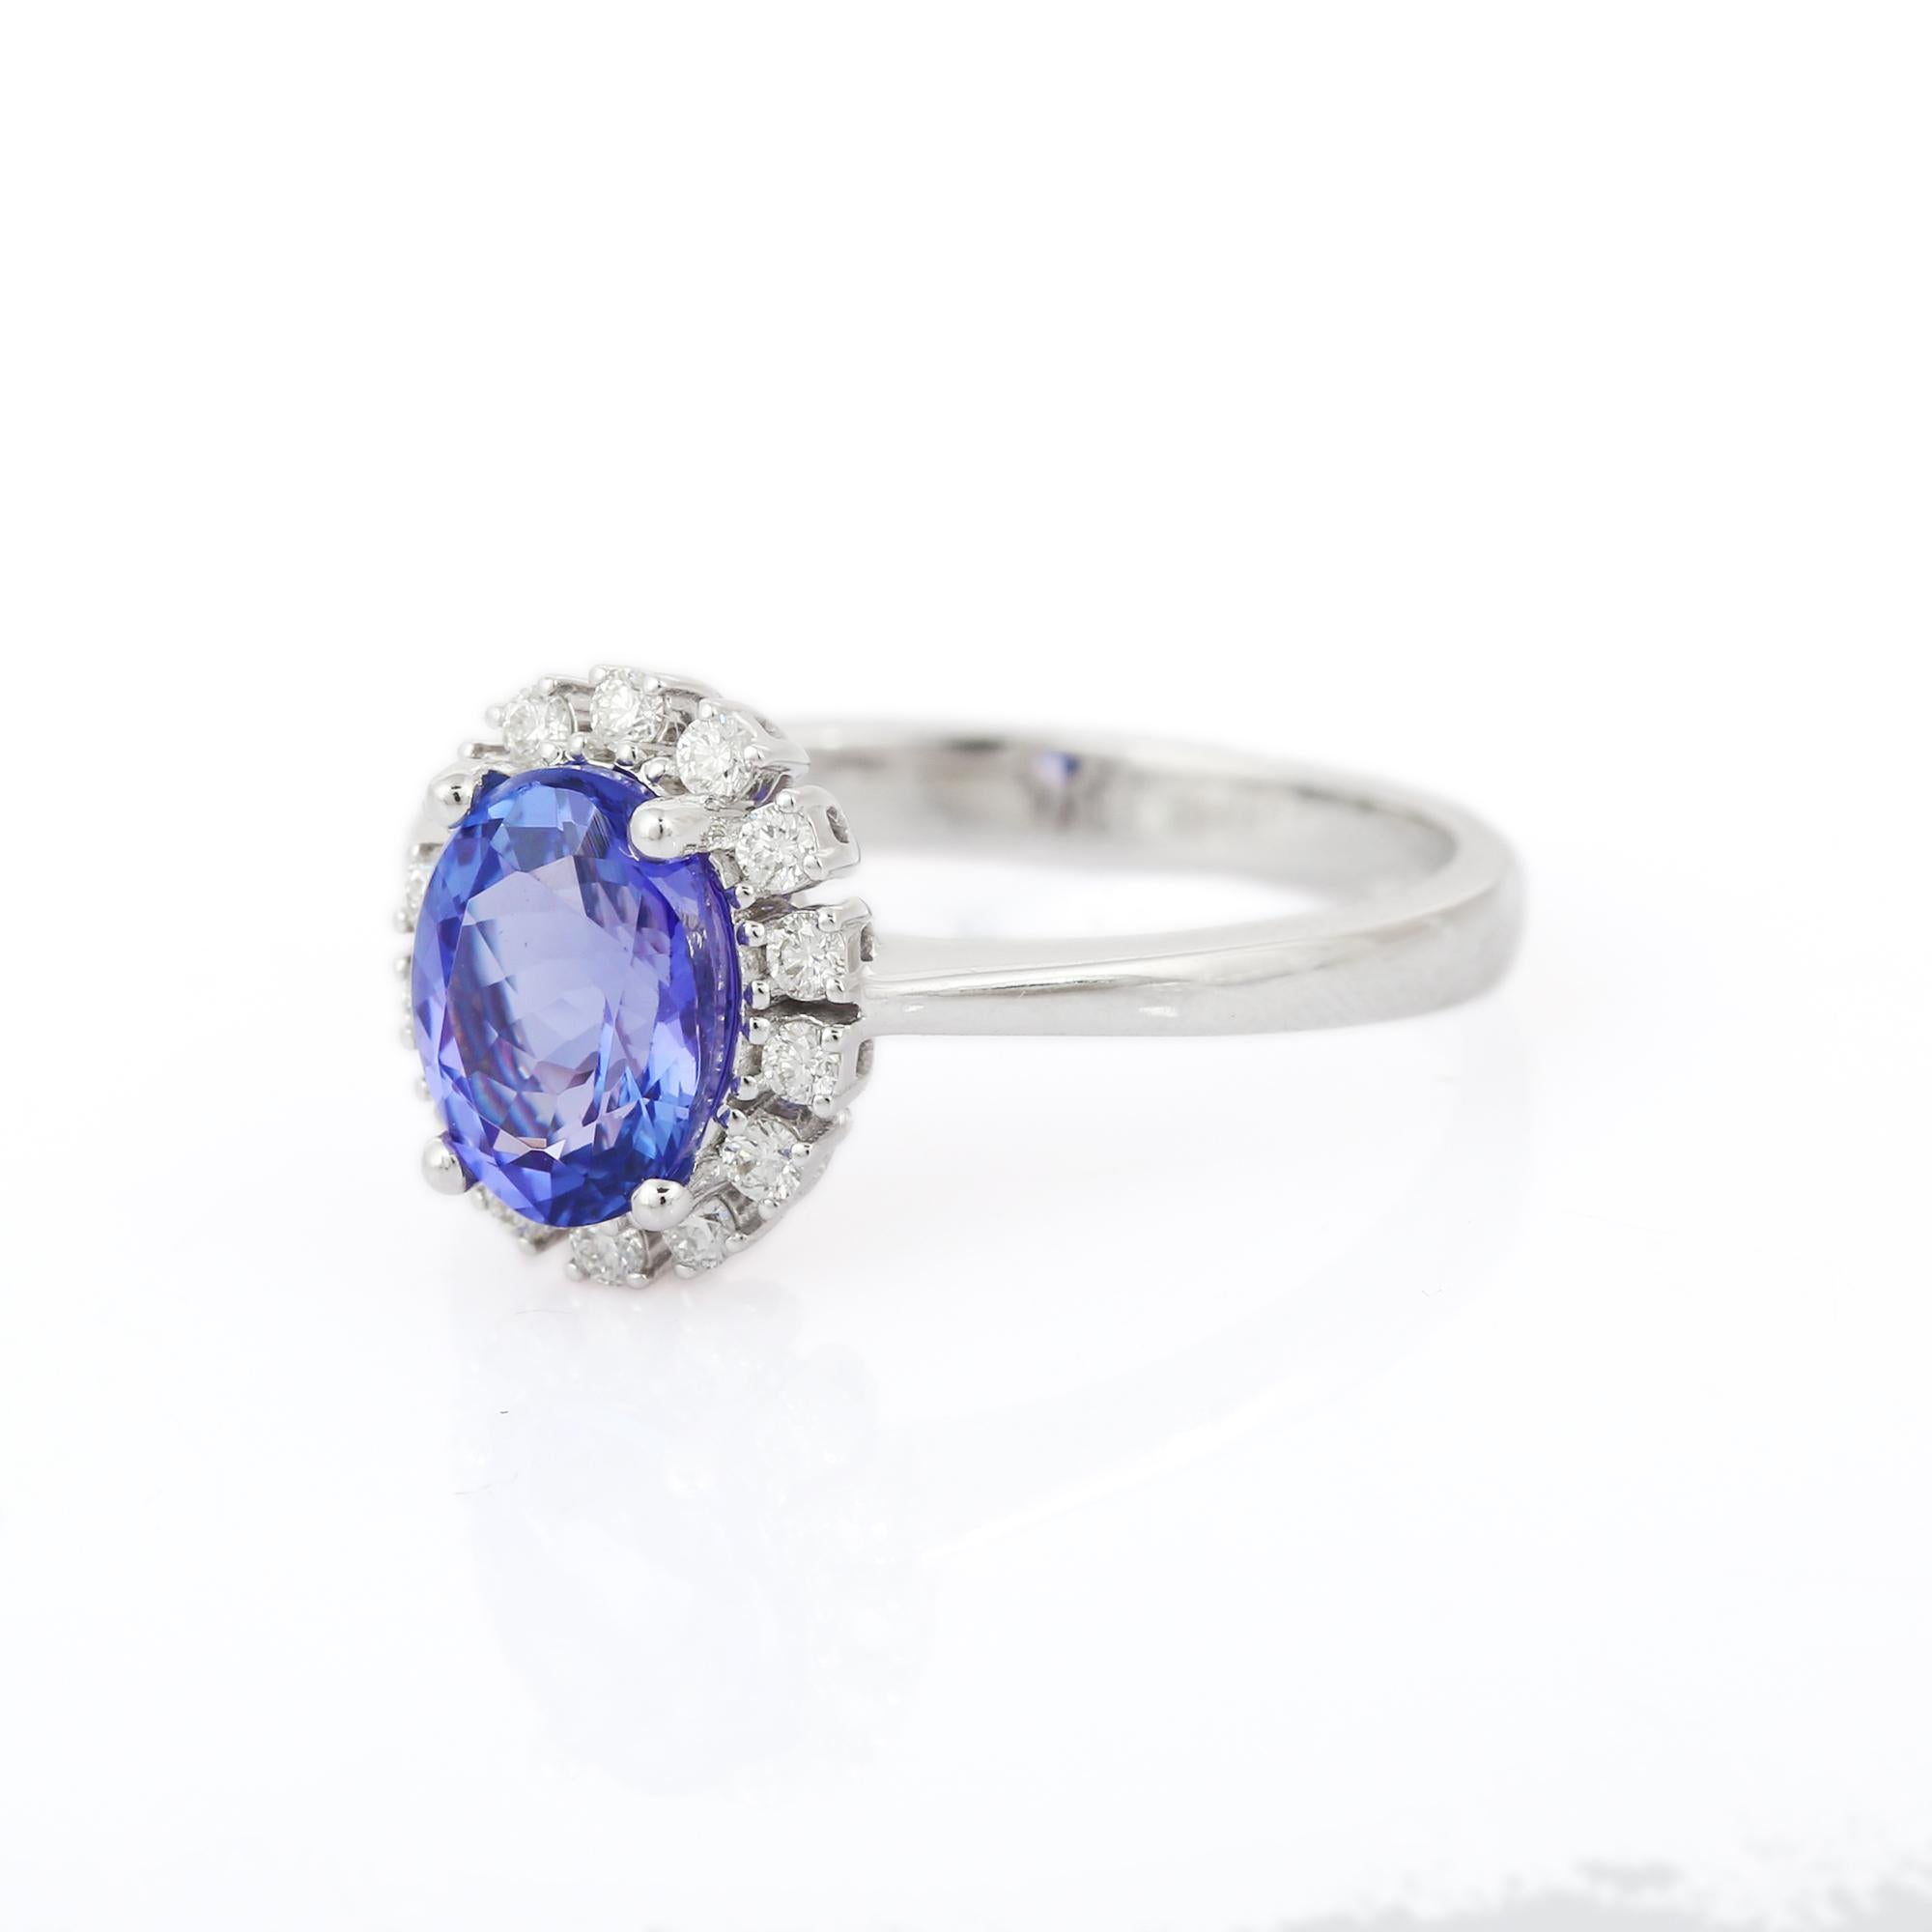 For Sale:  18k Solid White Gold Tanzanite and Diamond Ring  2